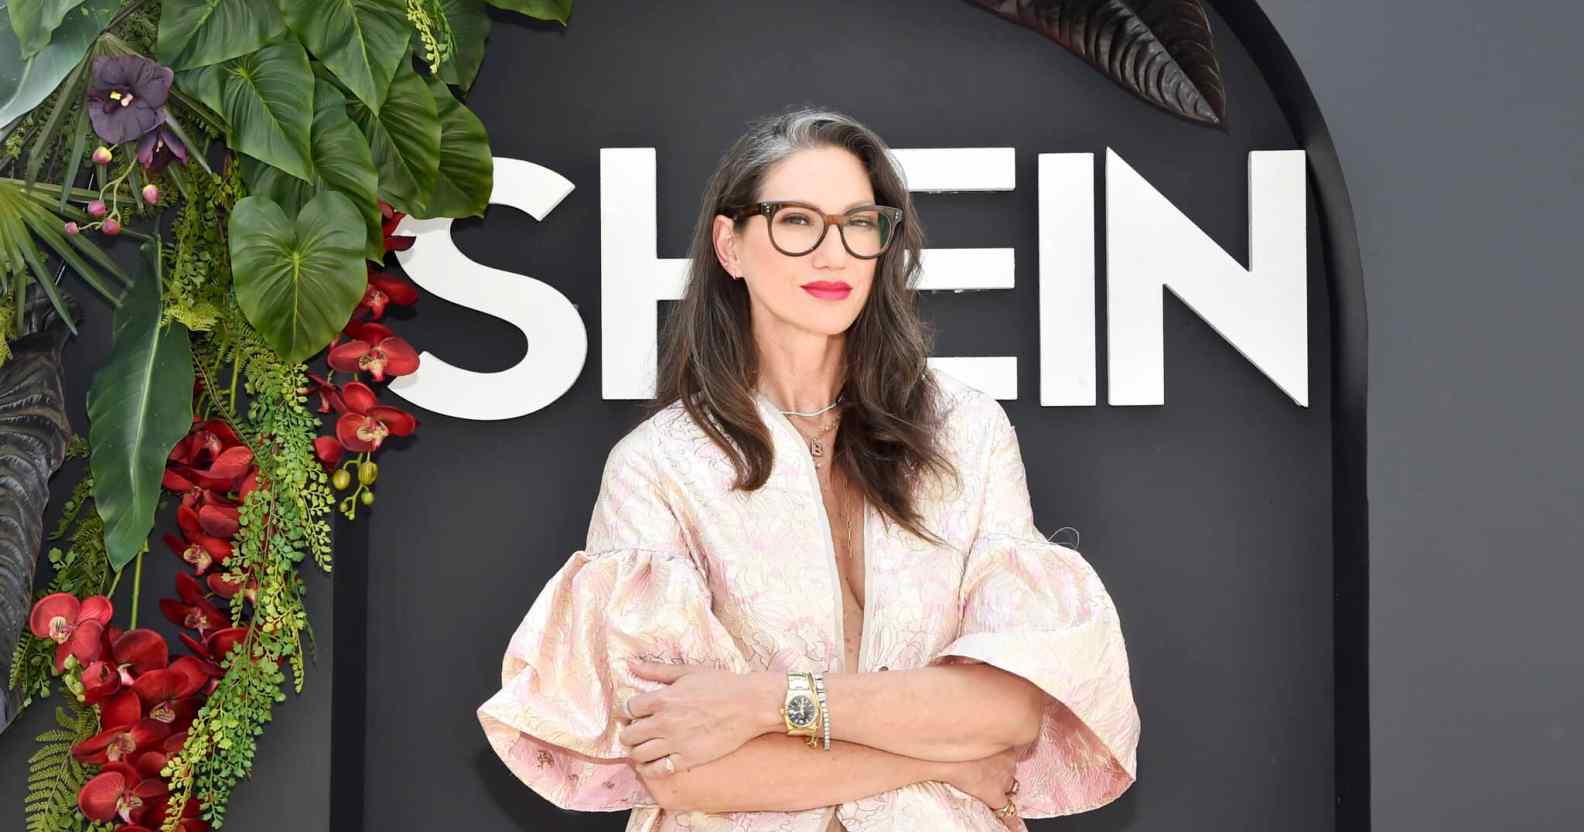 A publicity photo of former president and creative director of J Crew Jenna Lyons